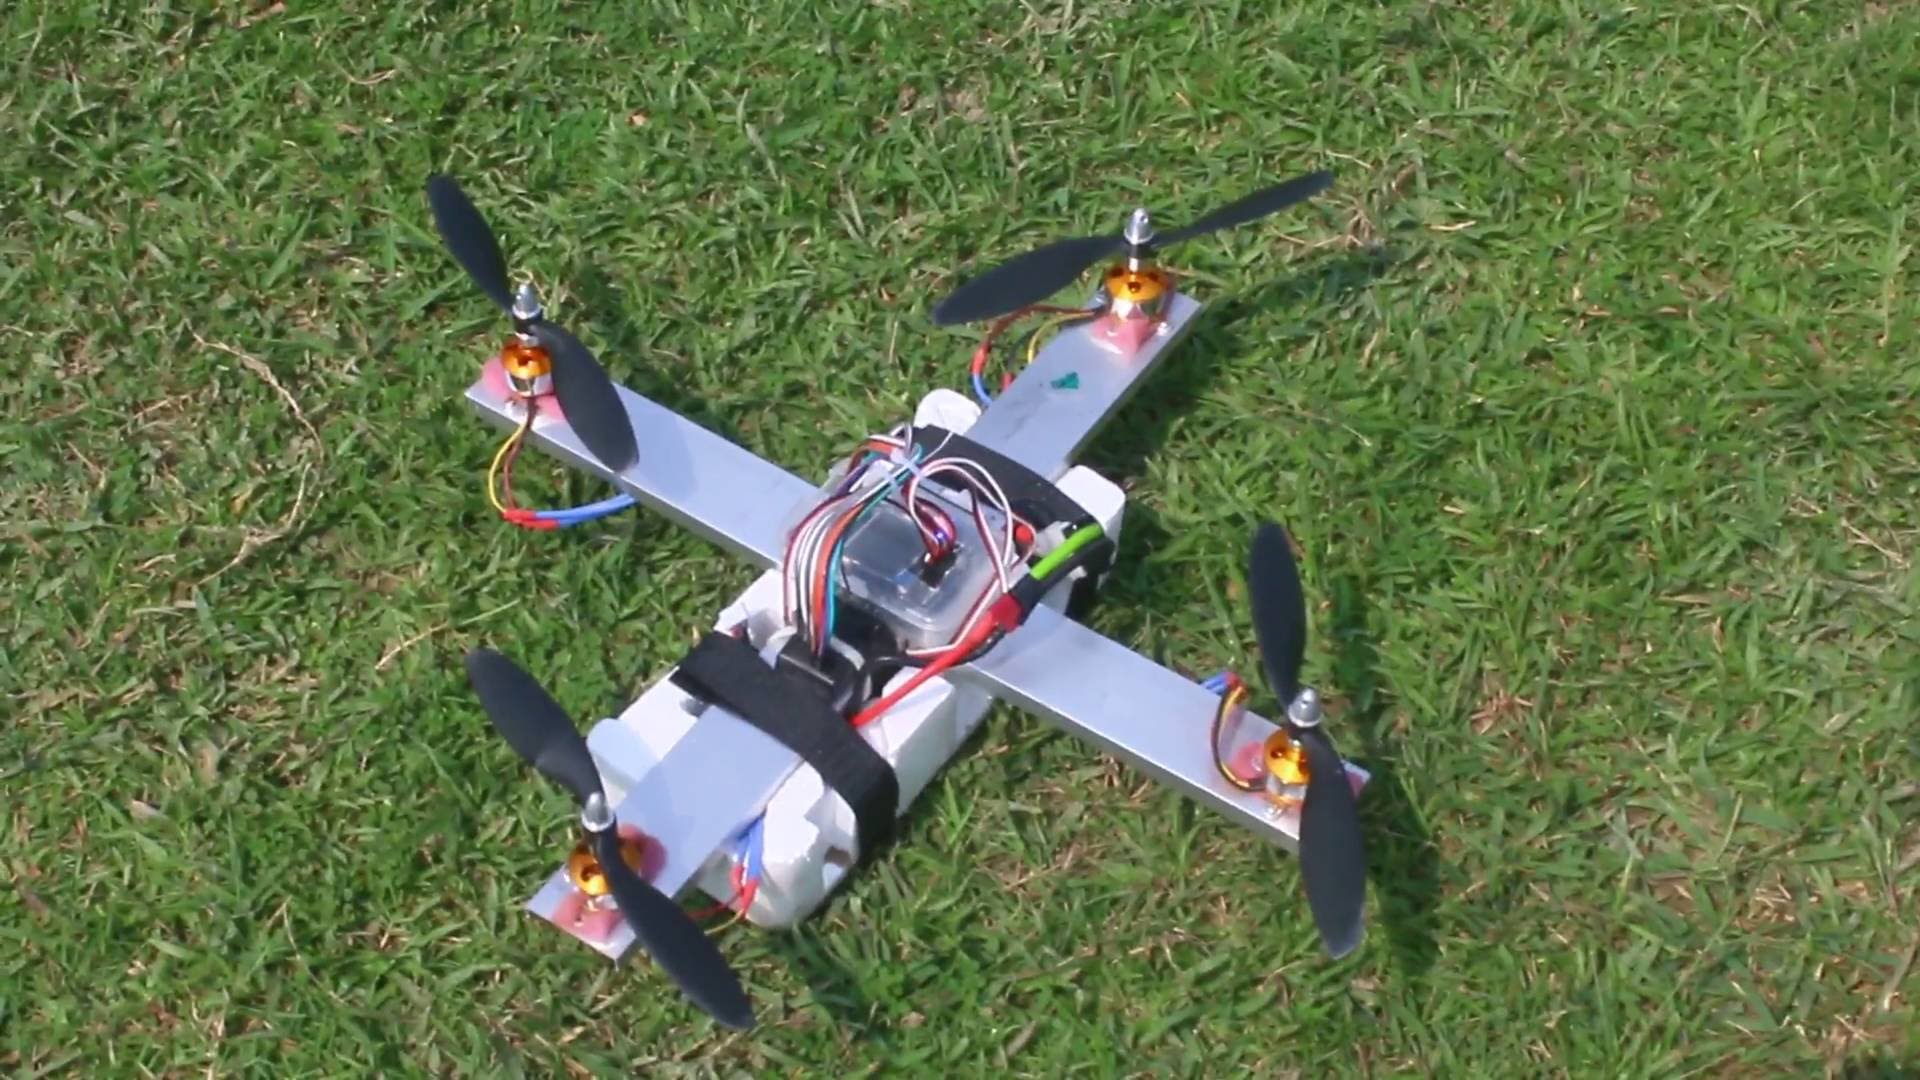 The Fly-BOY (Quadcopter made by RUET IPE 12 series) (Test Flight)